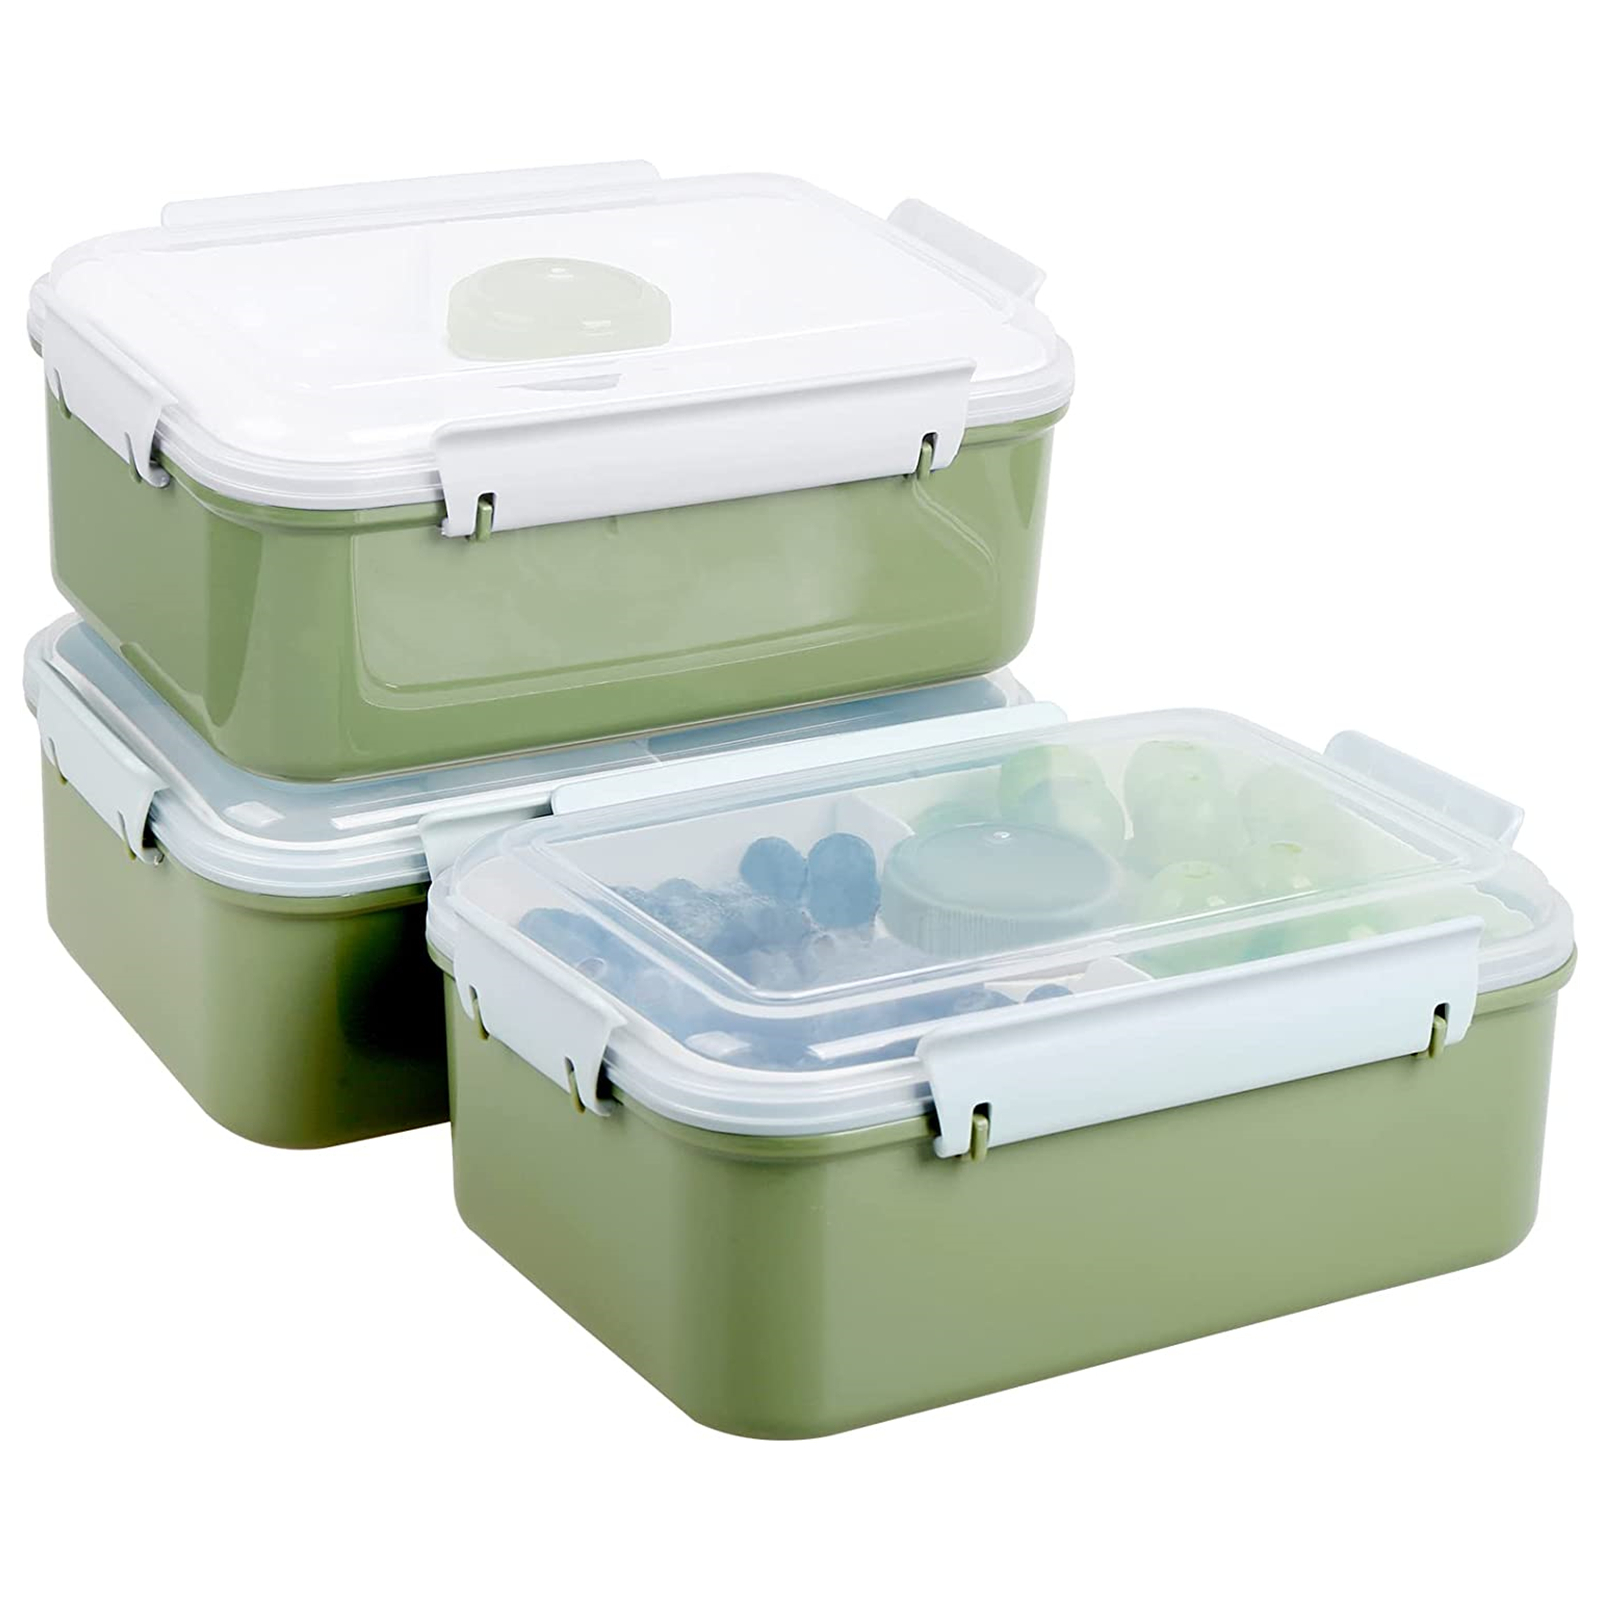 shopwithgreen 52 OZ to Go Salad Container Lunch Container, BPA-Free,  3-Compartment for Salad Toppings and Snacks, Salad Bowl with Dressing  Container